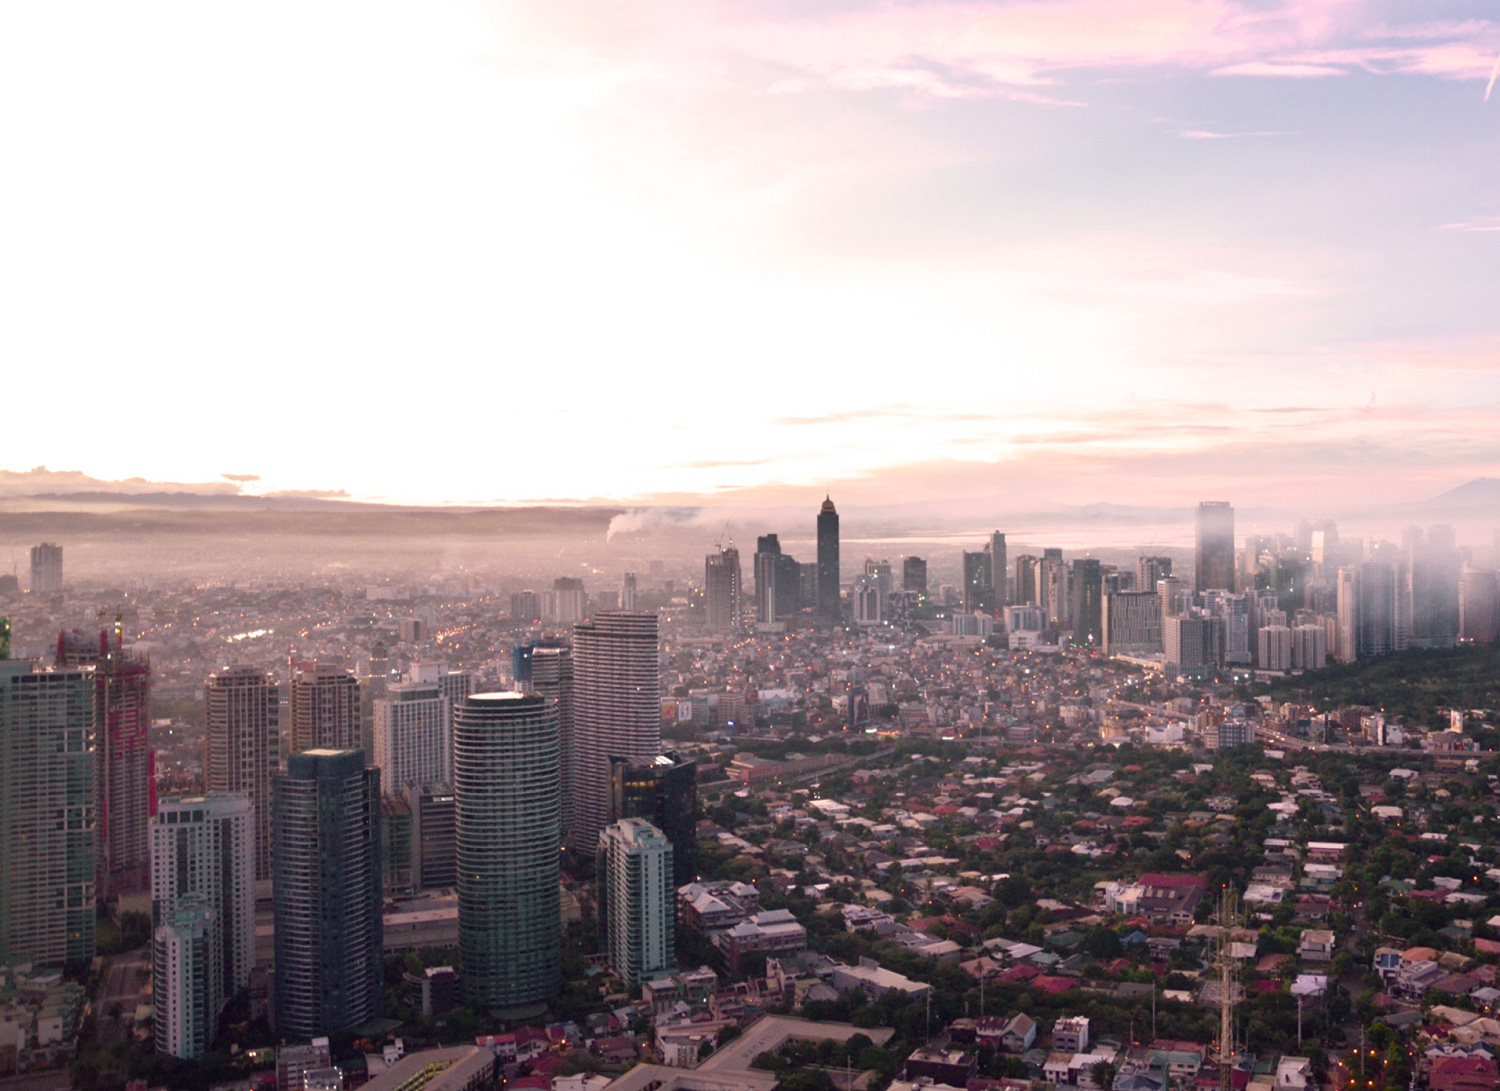 Urban city in the Philippines